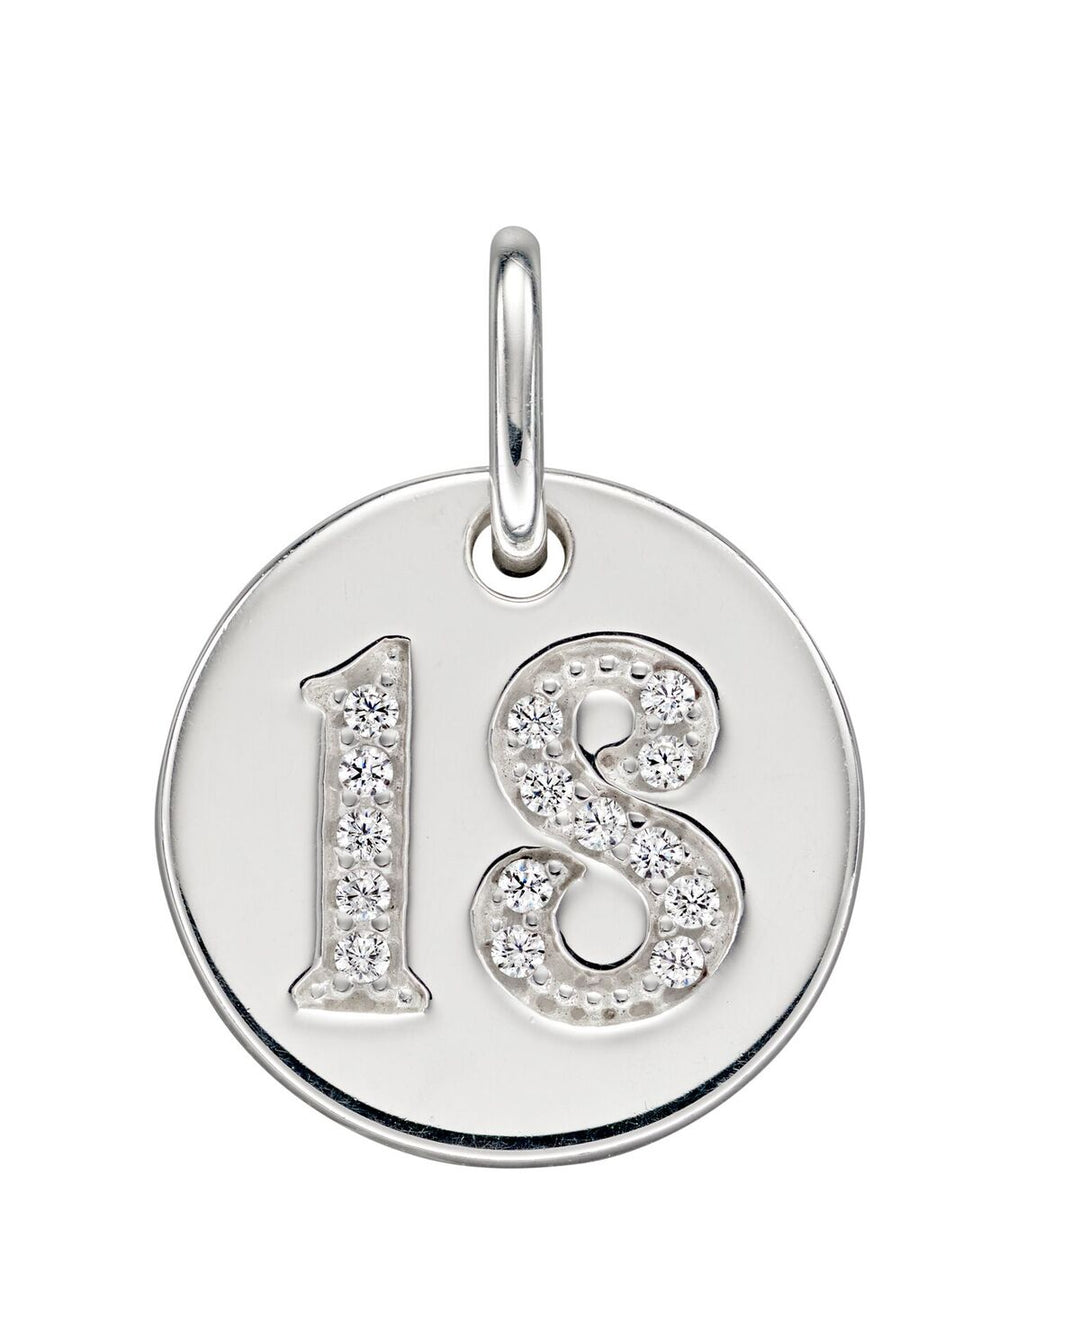 Penmans |  Special Occasion '18' Charm